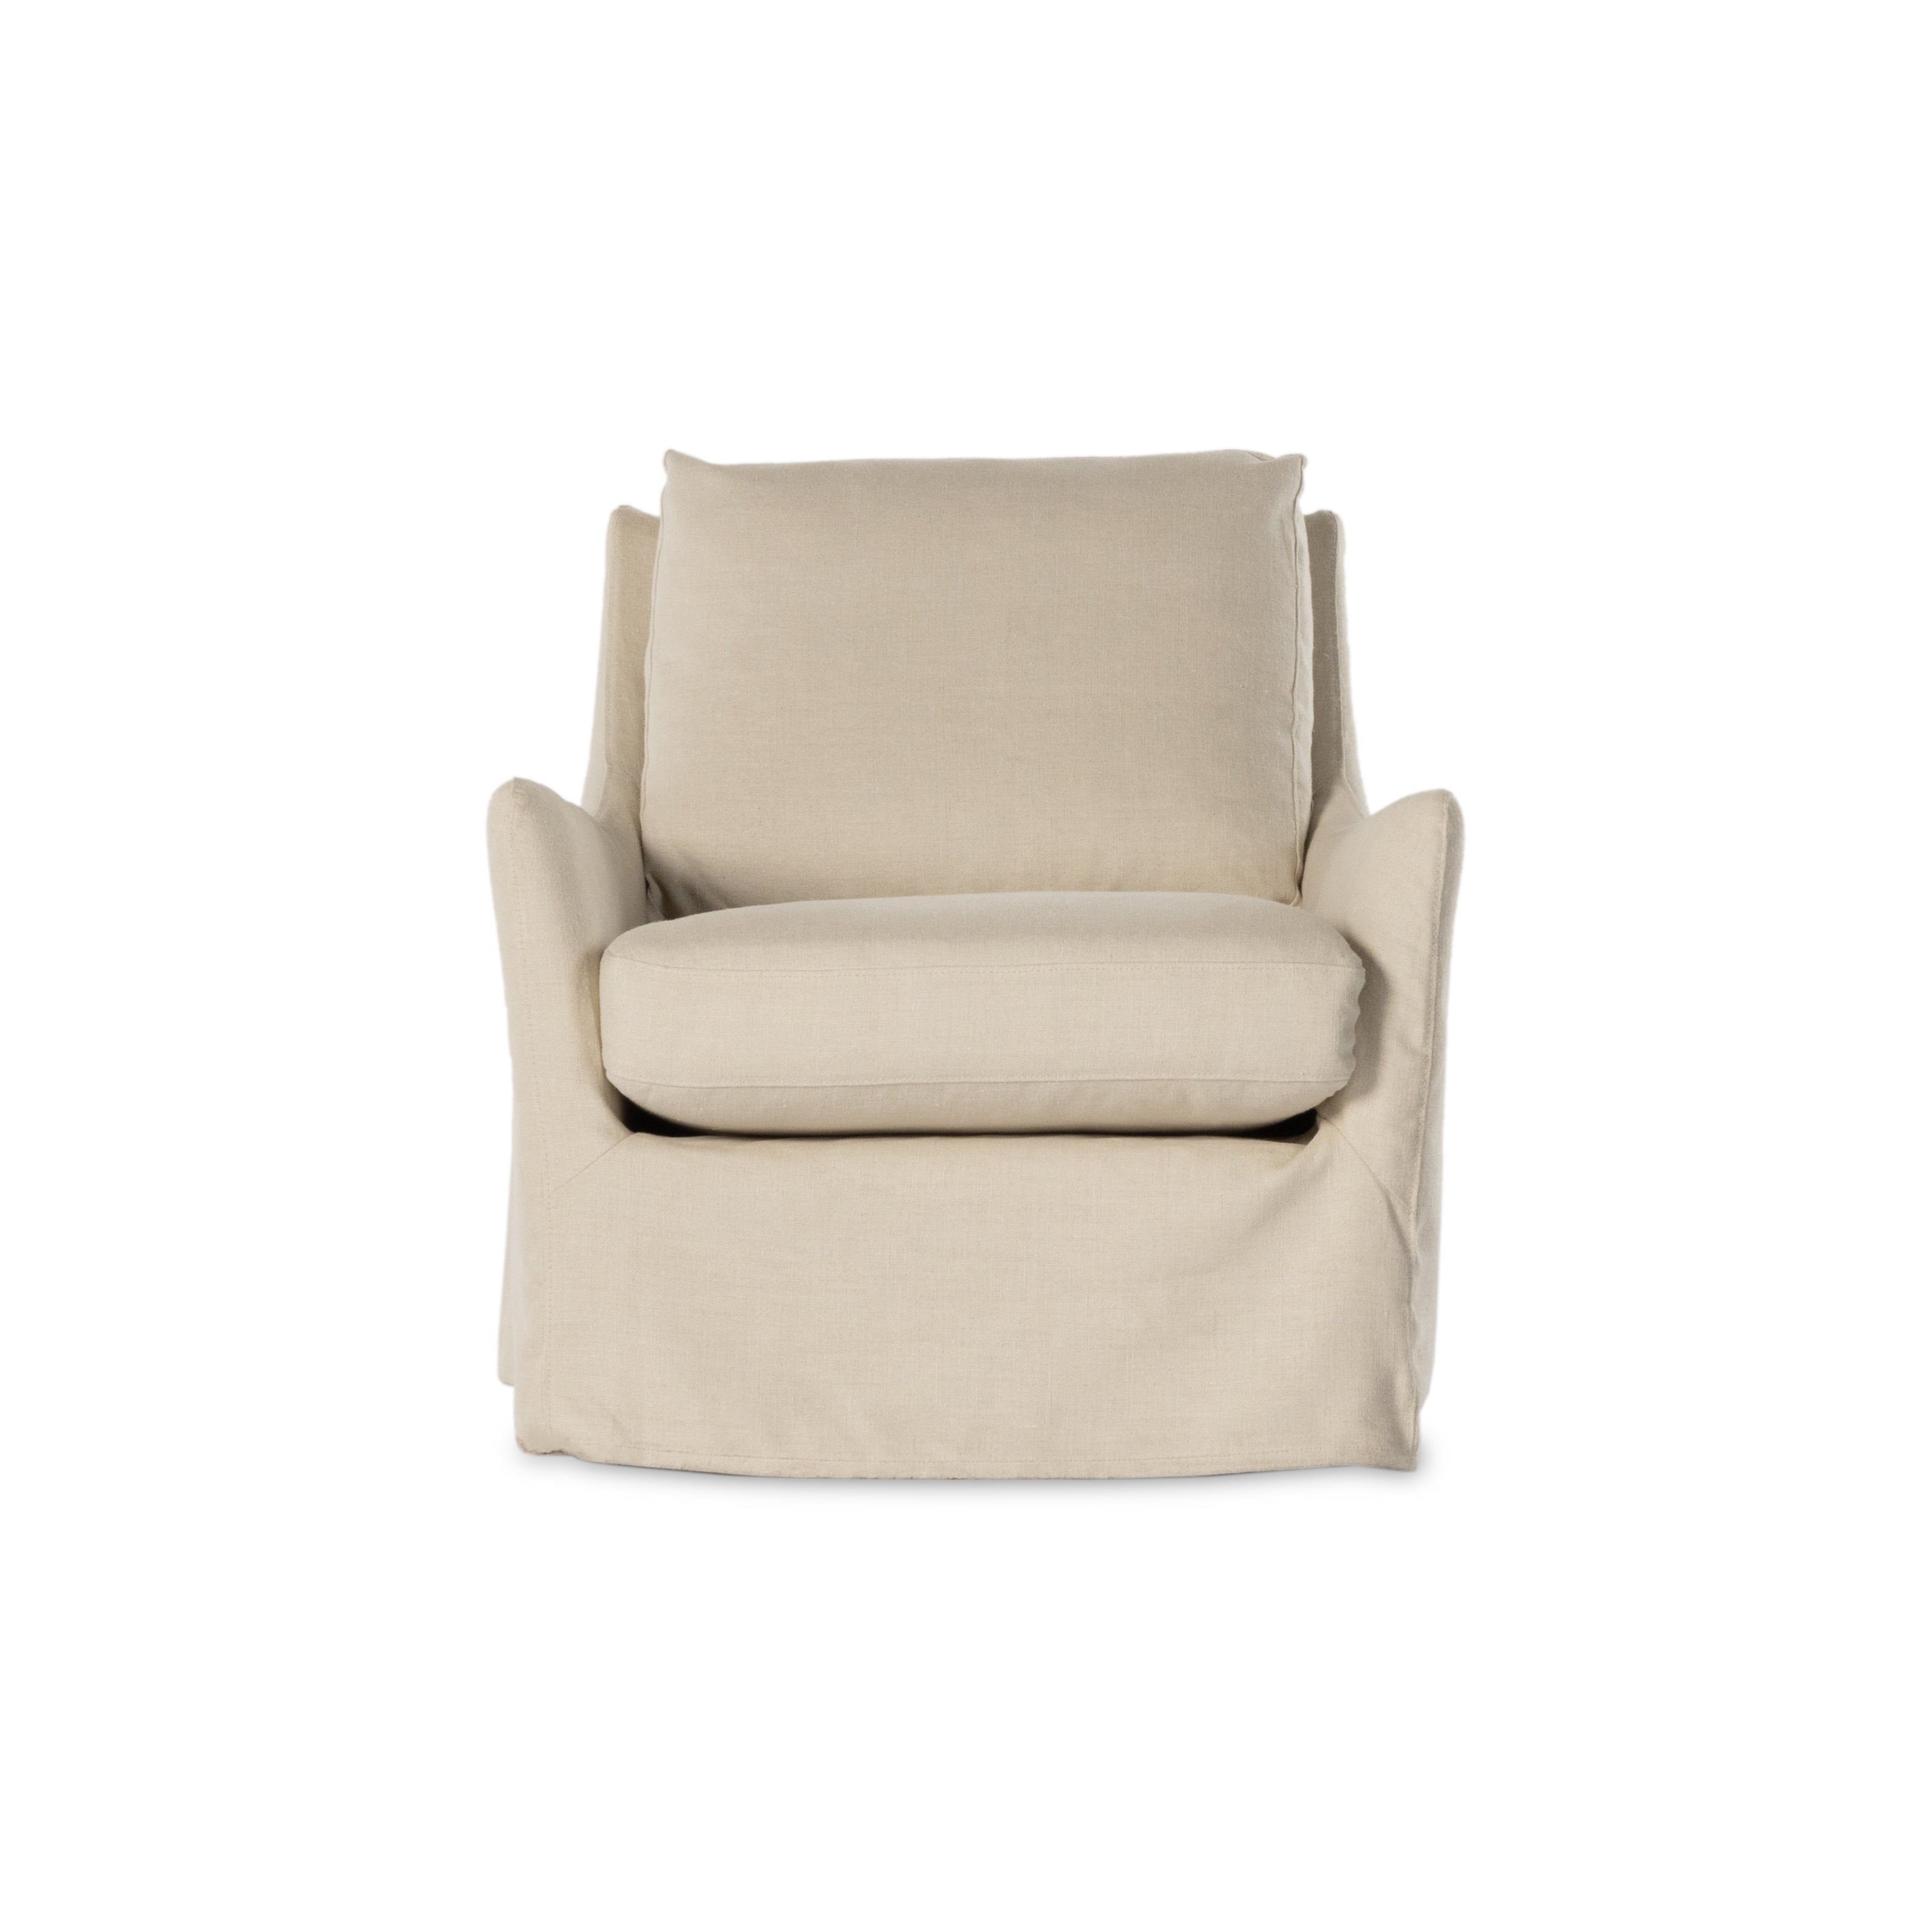 This 360-degree swivel chair is defined by slightly sloping, flared arms and a floor-length slipcover. Finished in a soft, tight weave slipcover for a traditional style. Durable and soft to the touch, Libecoâ„¢-sourced linens are artisan-made and free of toxic chemicals. Slipcovered styles are fully removable and machine-washable for easy care. Amethyst Home provides interior design, new construction, custom furniture and area rugs in the Boston metro area